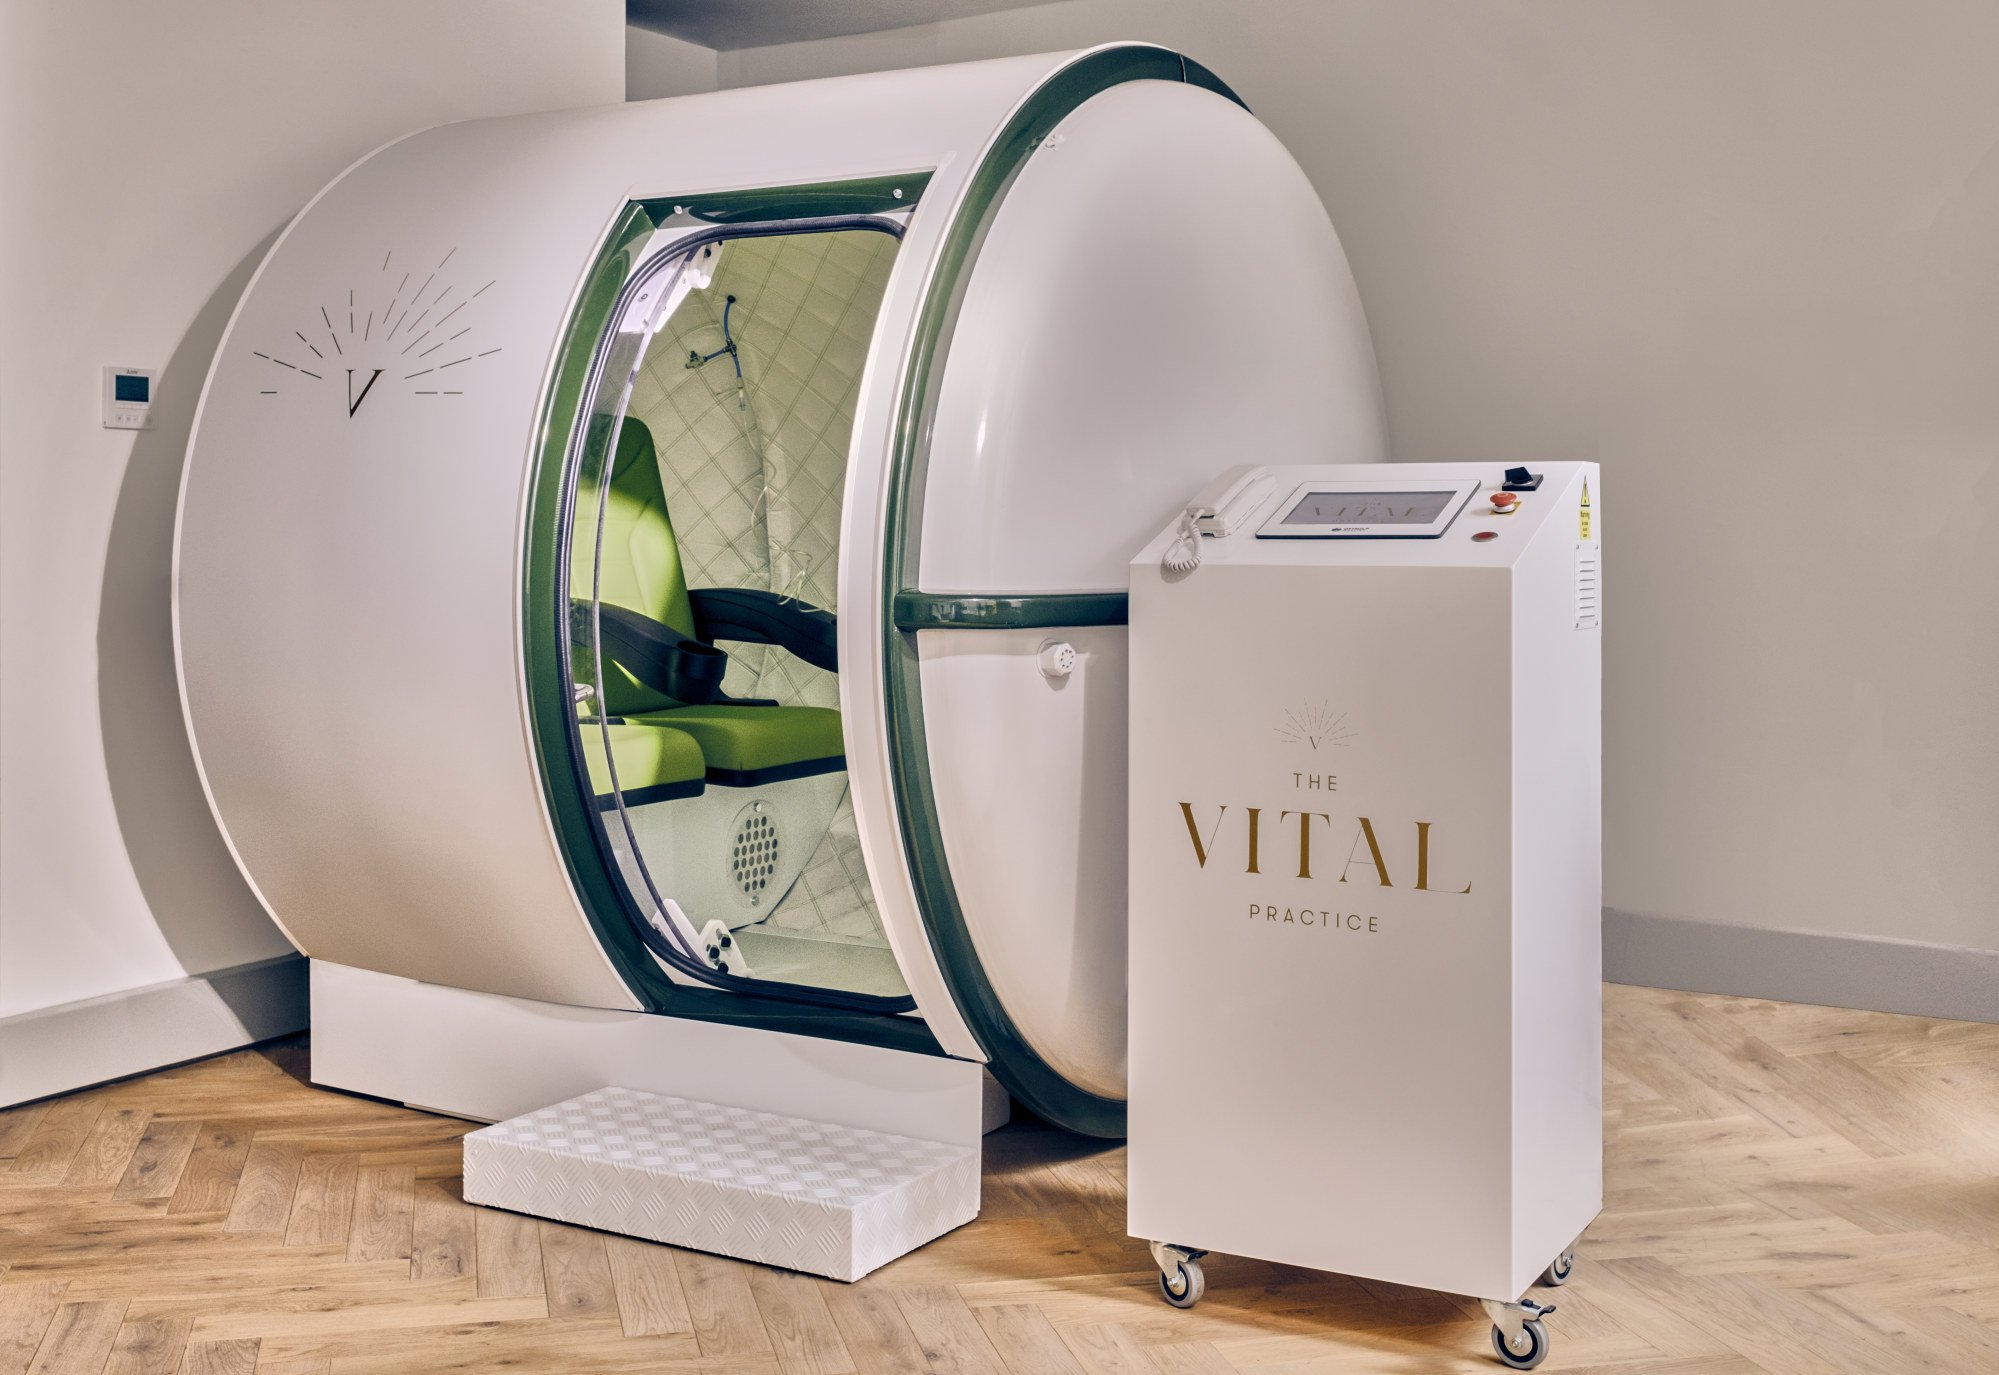 The two-seater HBOT chamber at The Vital Practice in London, the UK. Photo: Amberin Fur